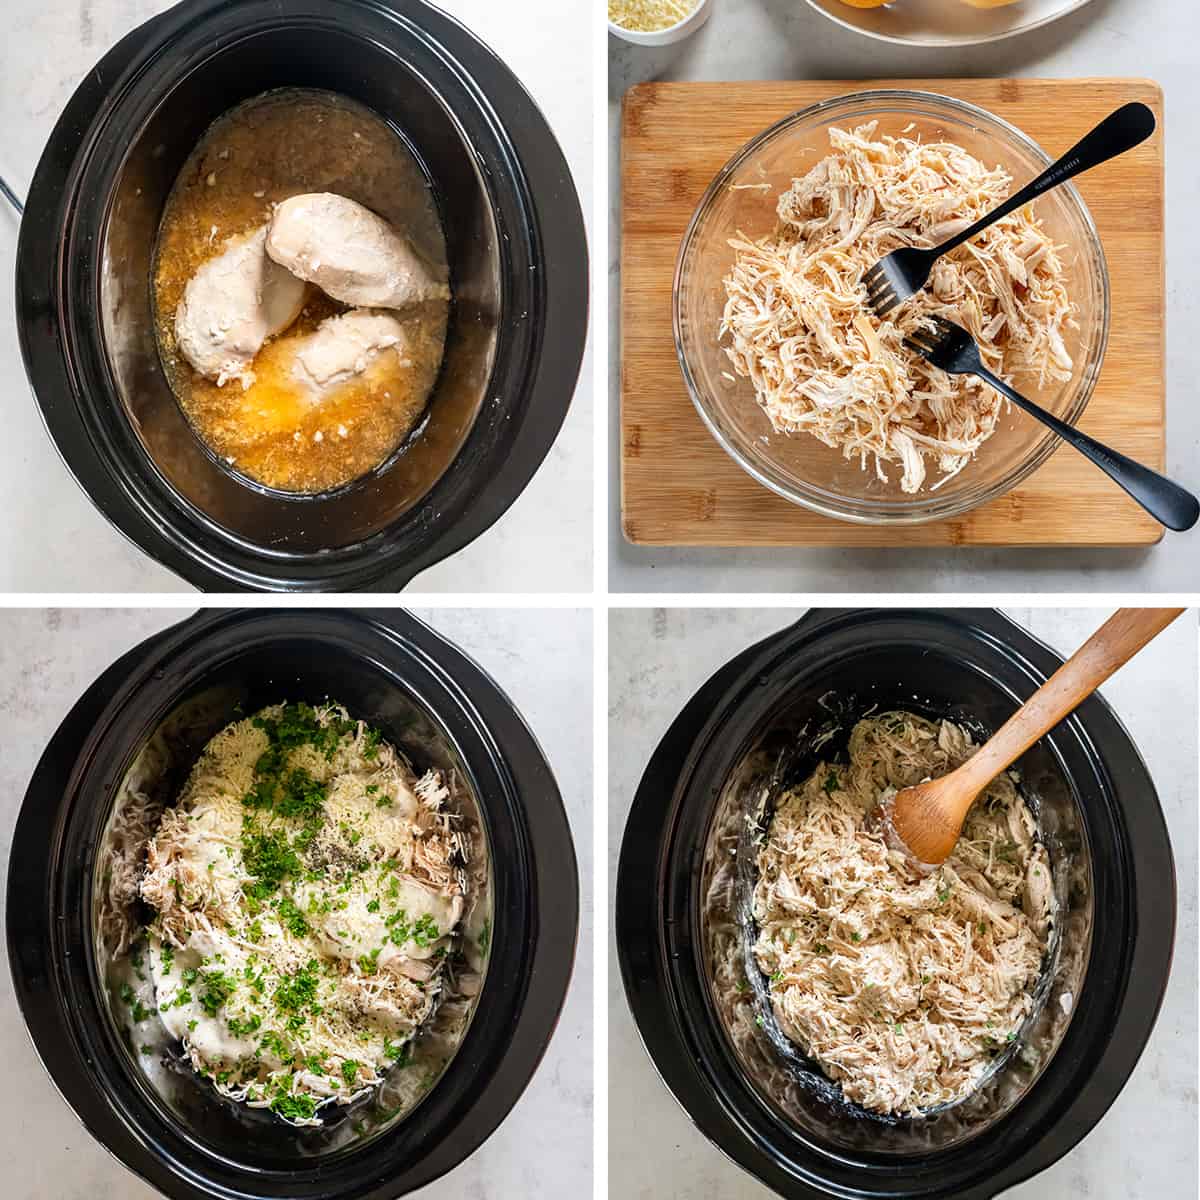 Four images of chicken in a slow cooker, shredded in a bowl, and back in the slow cooker mixed with Caesar salad dressing.